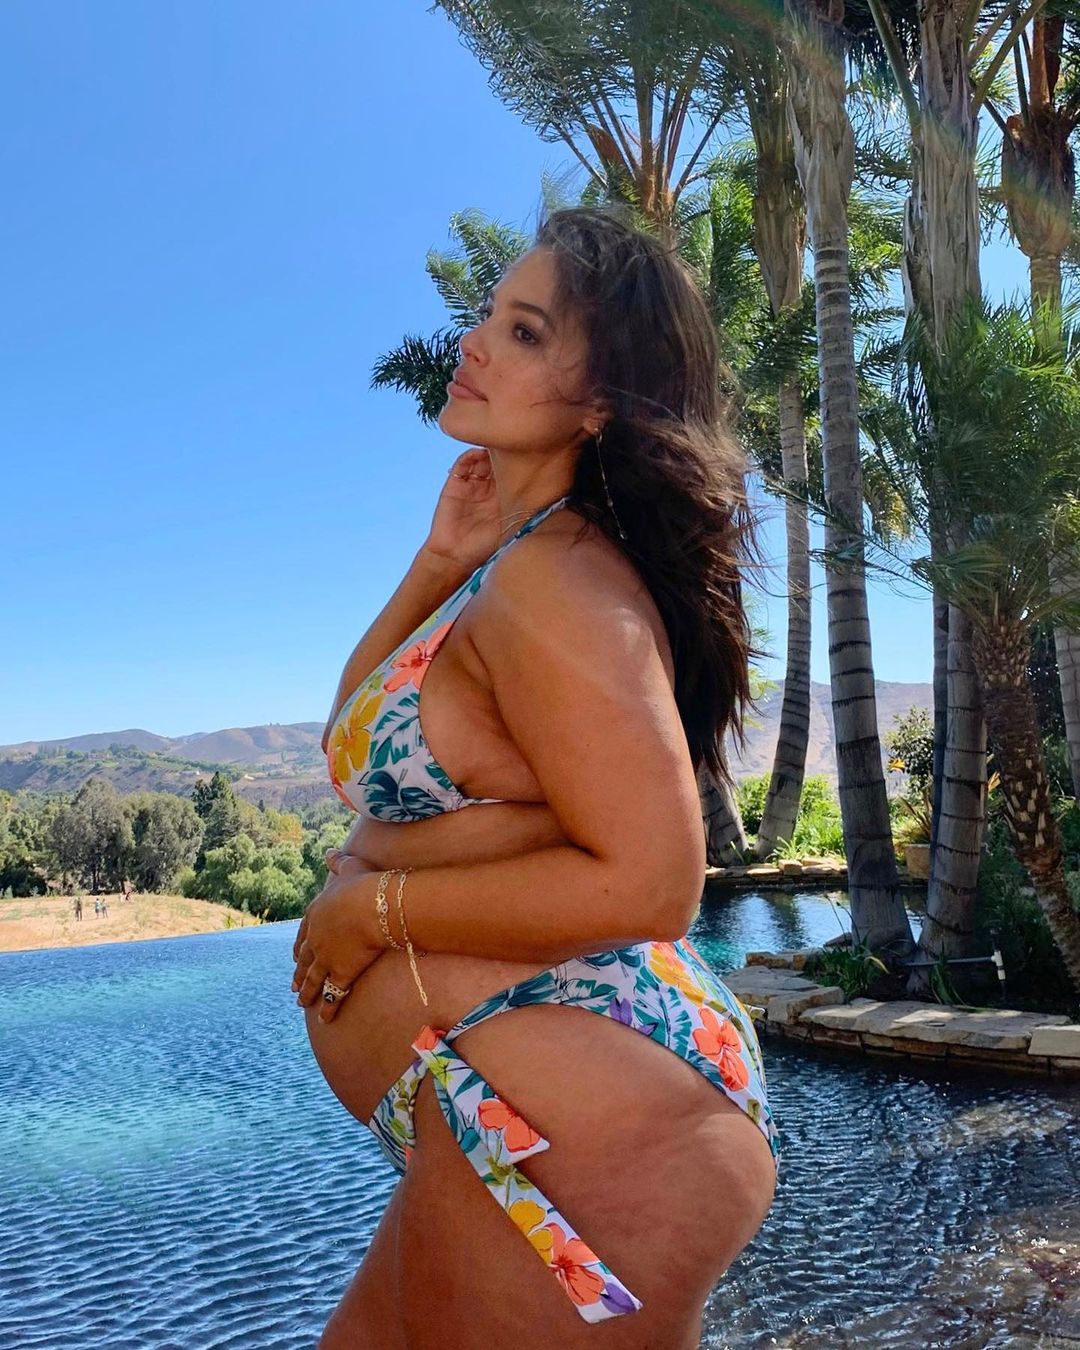 Ashley Graham Poses in a Bikini and Wings on Instagram